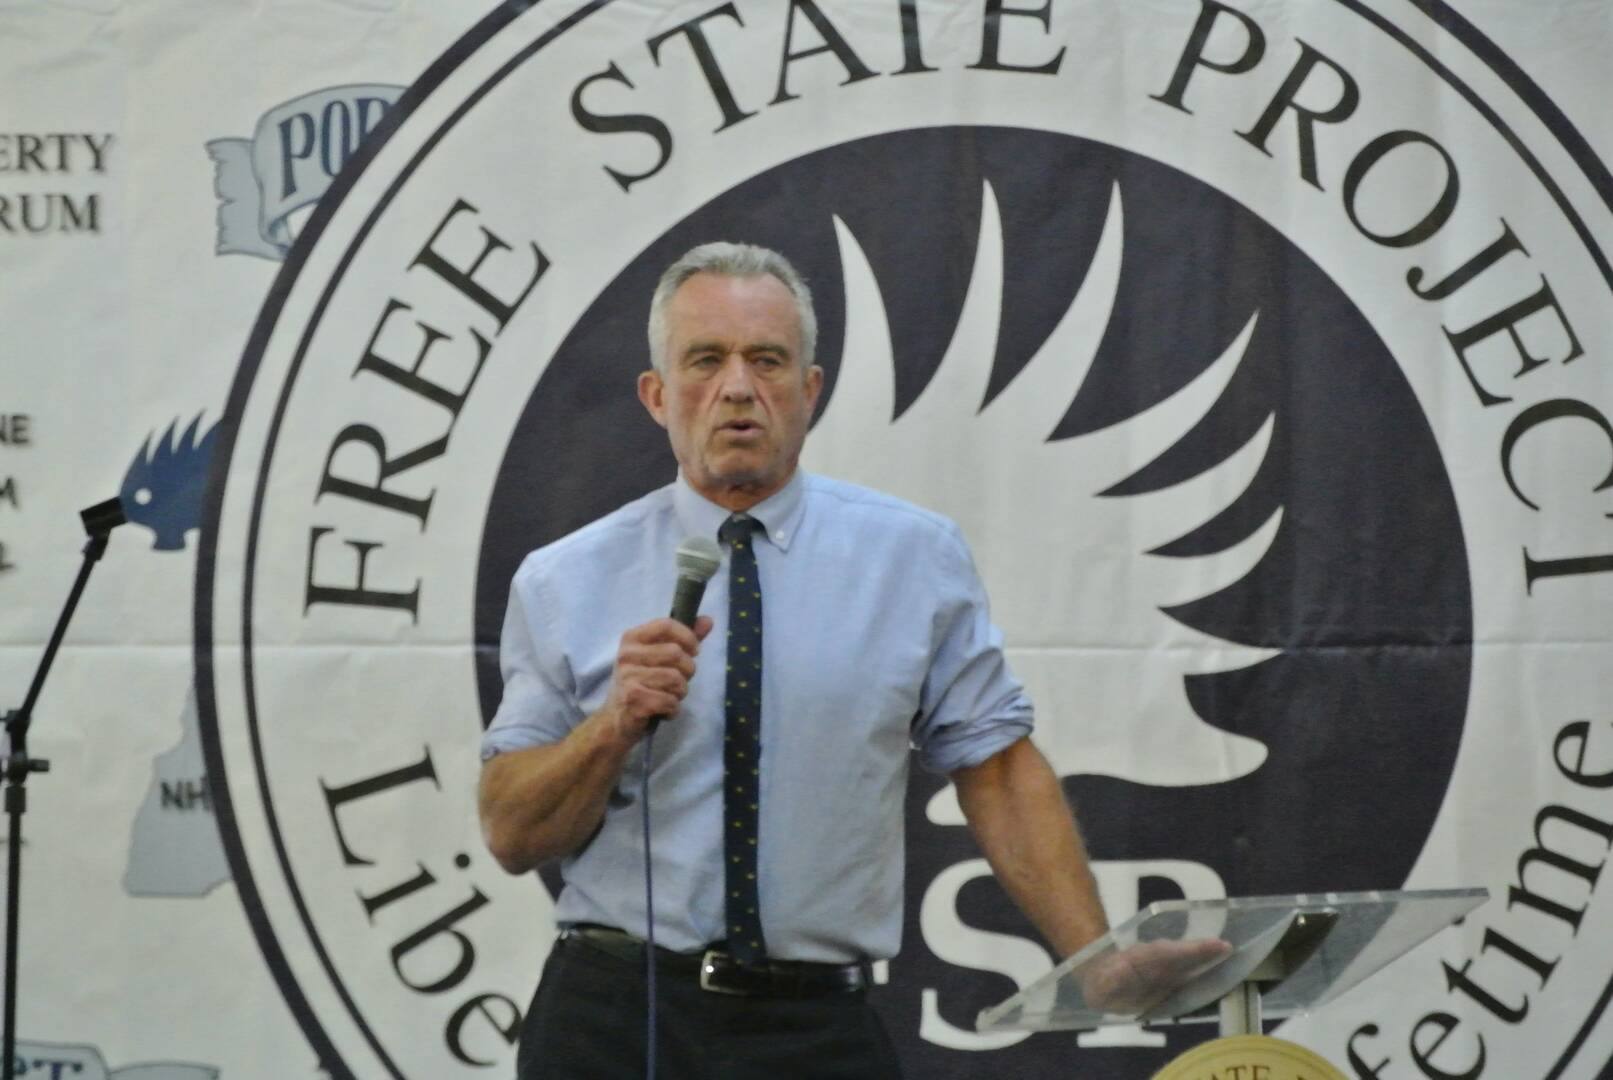 RFK Jr. speaks at PorcFest (Photo by author)